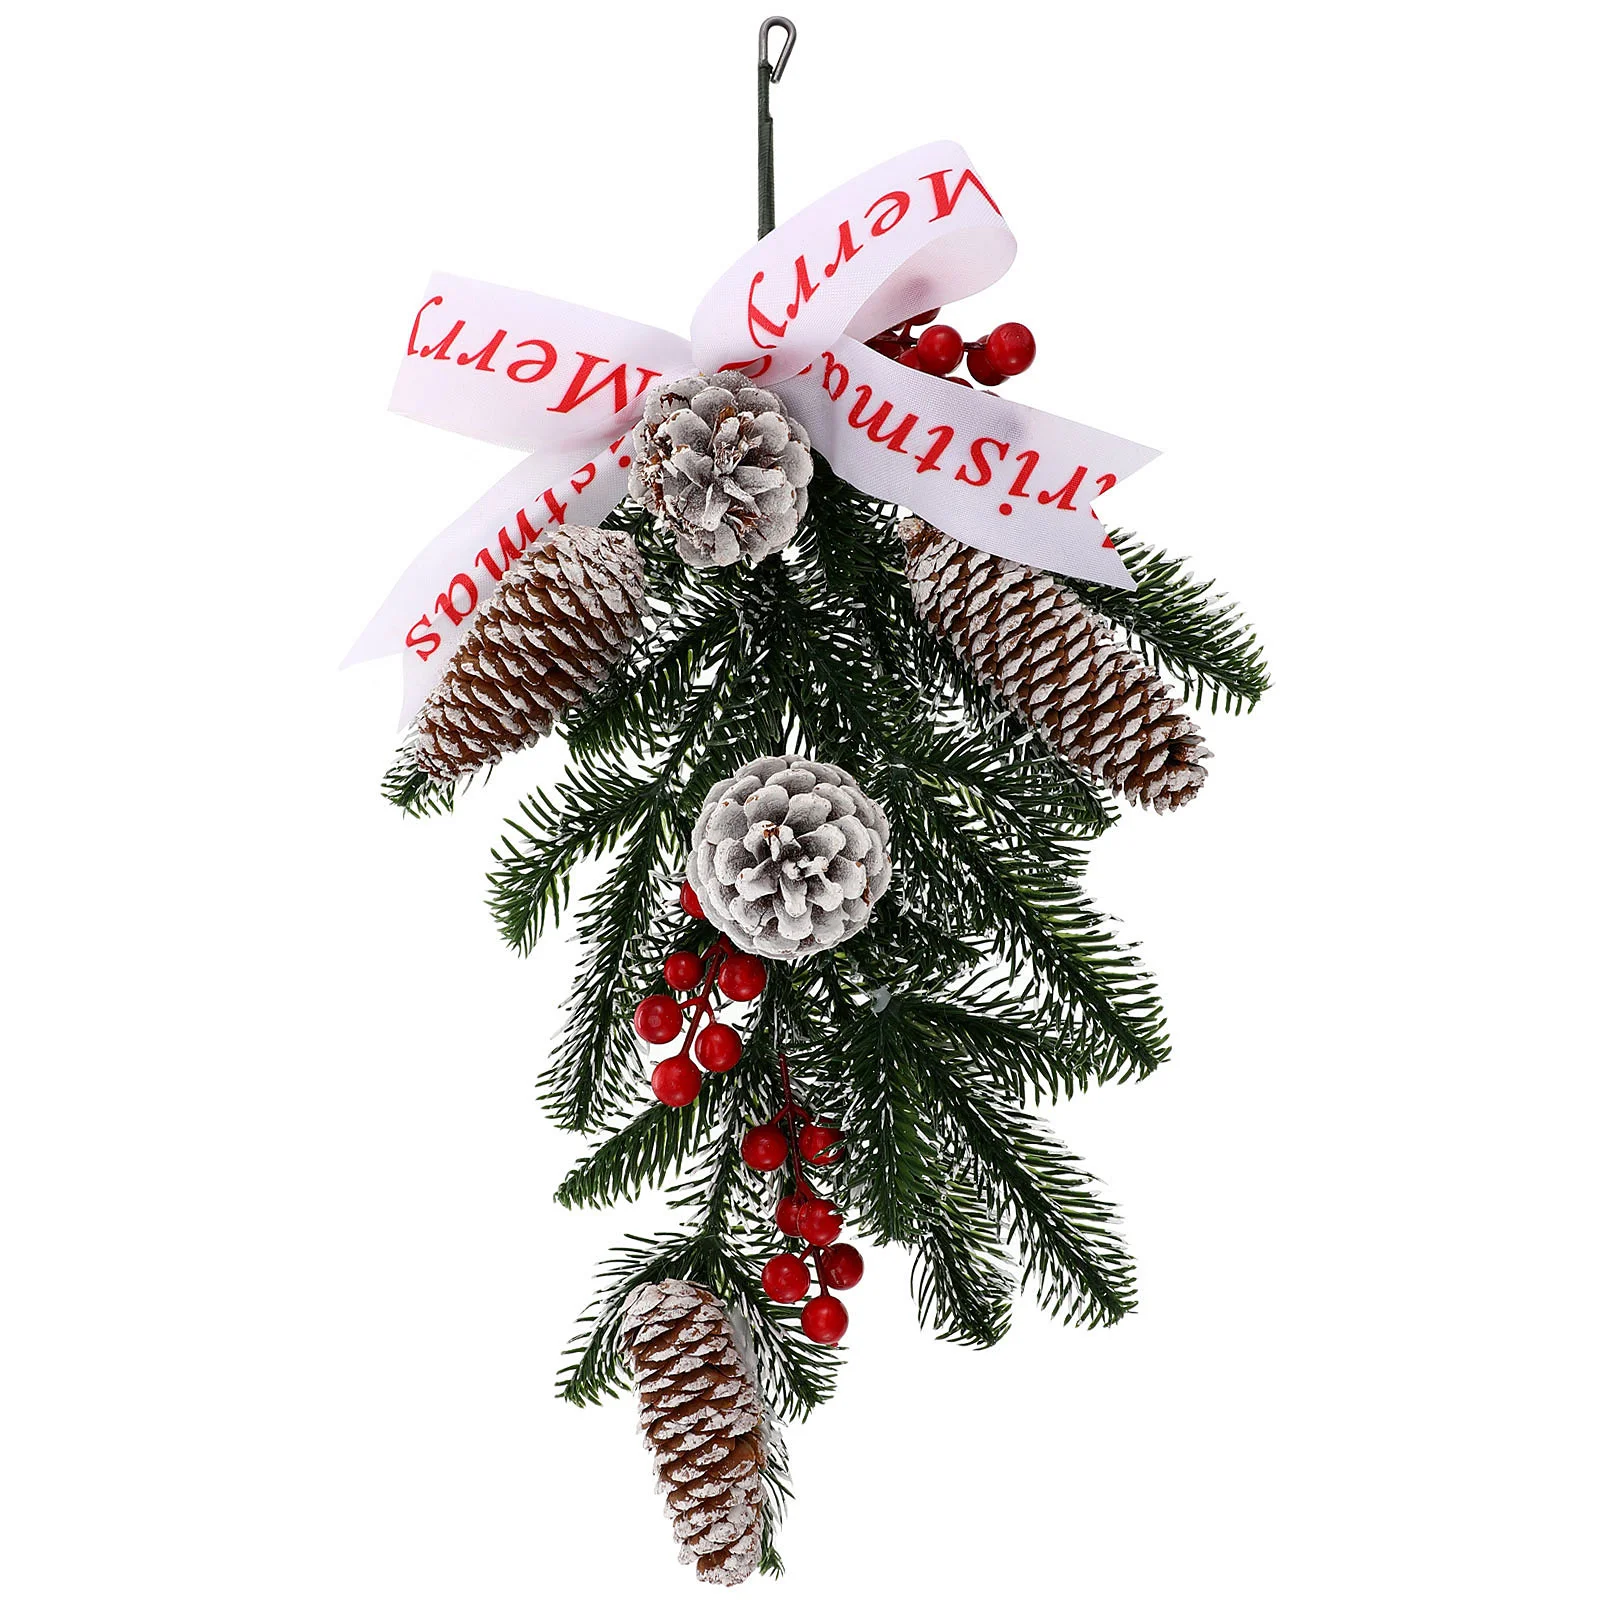 

Pine Cone Hanging Tree Christmas Door Swag Floral Wreaths Front Cones Flower Decorations Red Berries Wall